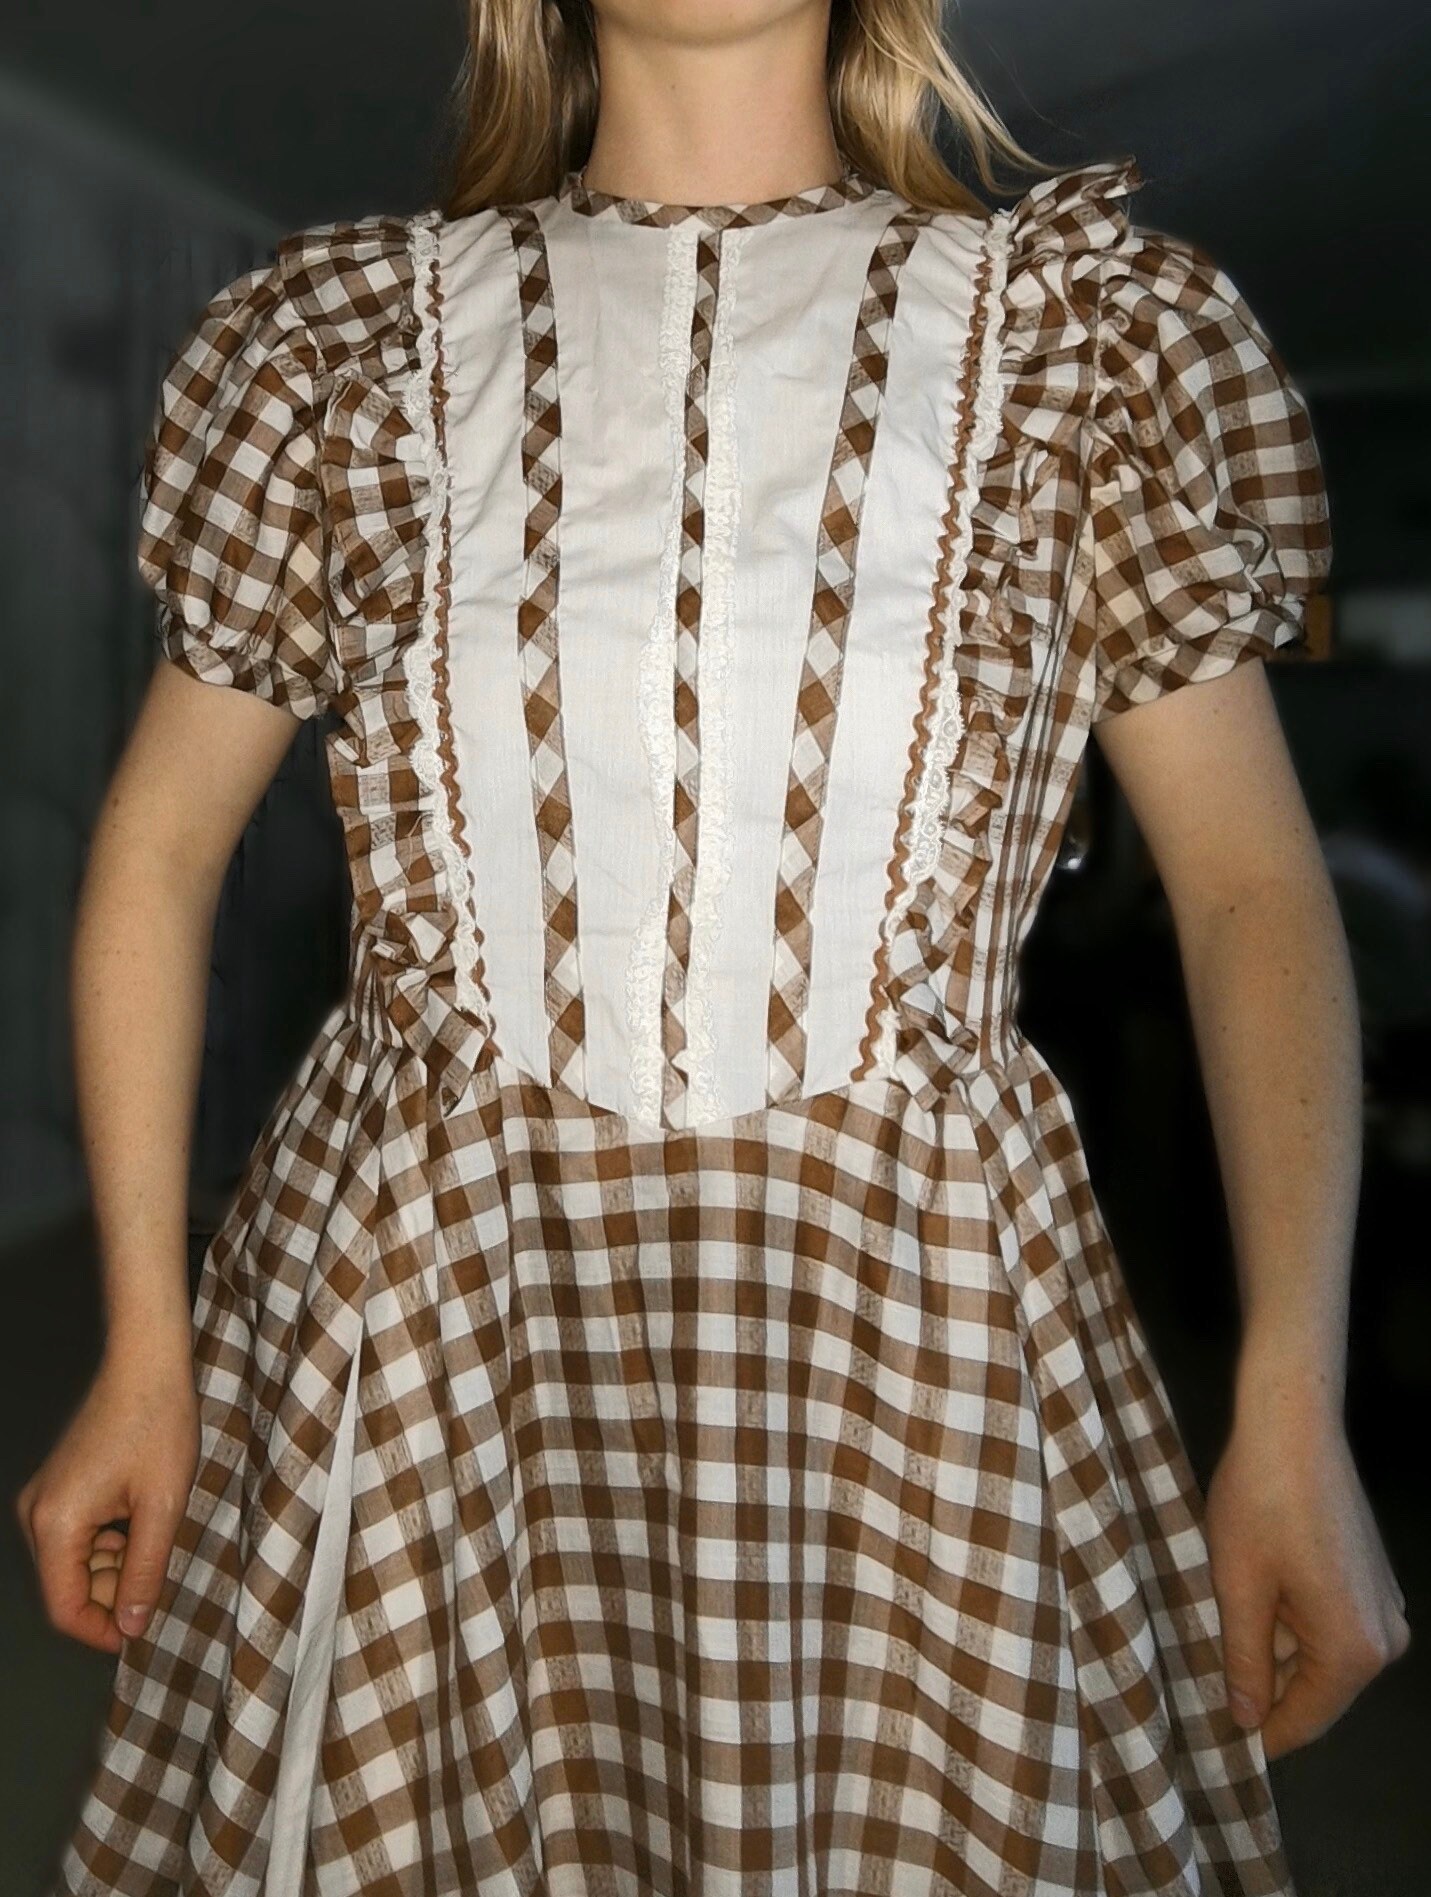 Beautiful Vintage 1970s Gingham Square Dancing Dress Size 8 / 10